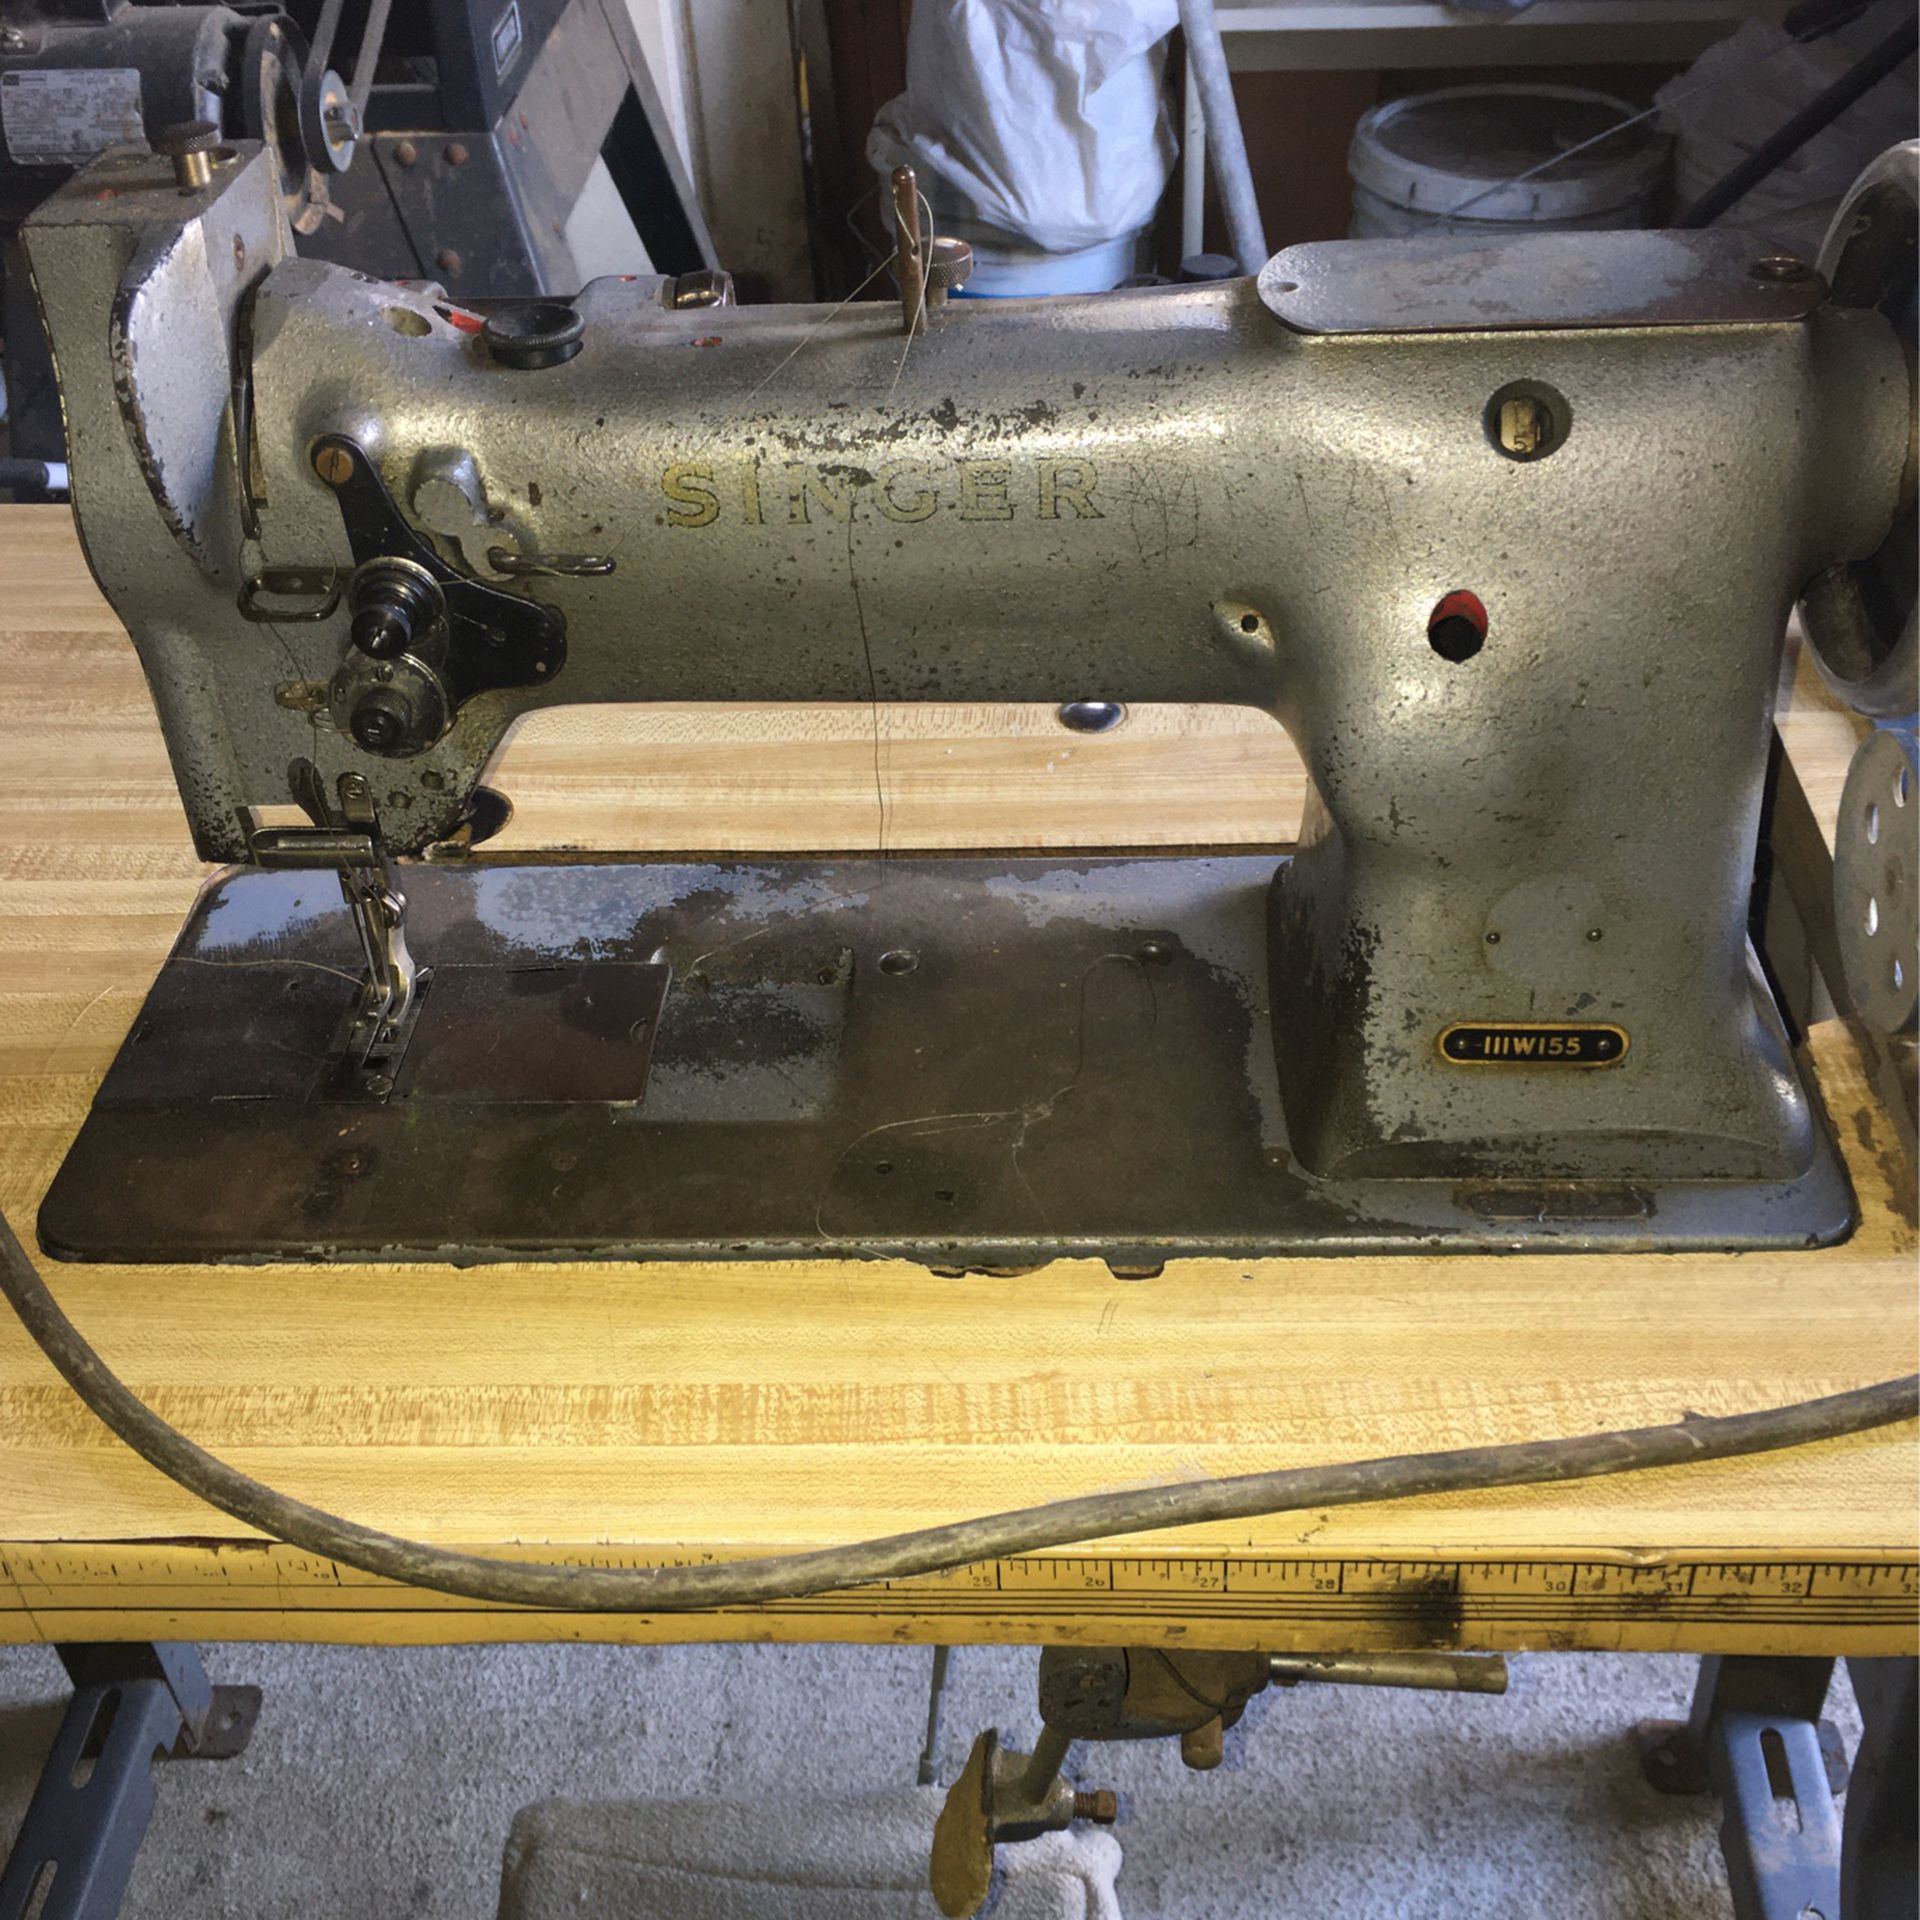 Upholstery Sewing Machine Singer 111w155 for Sale in Los Angeles, CA ...